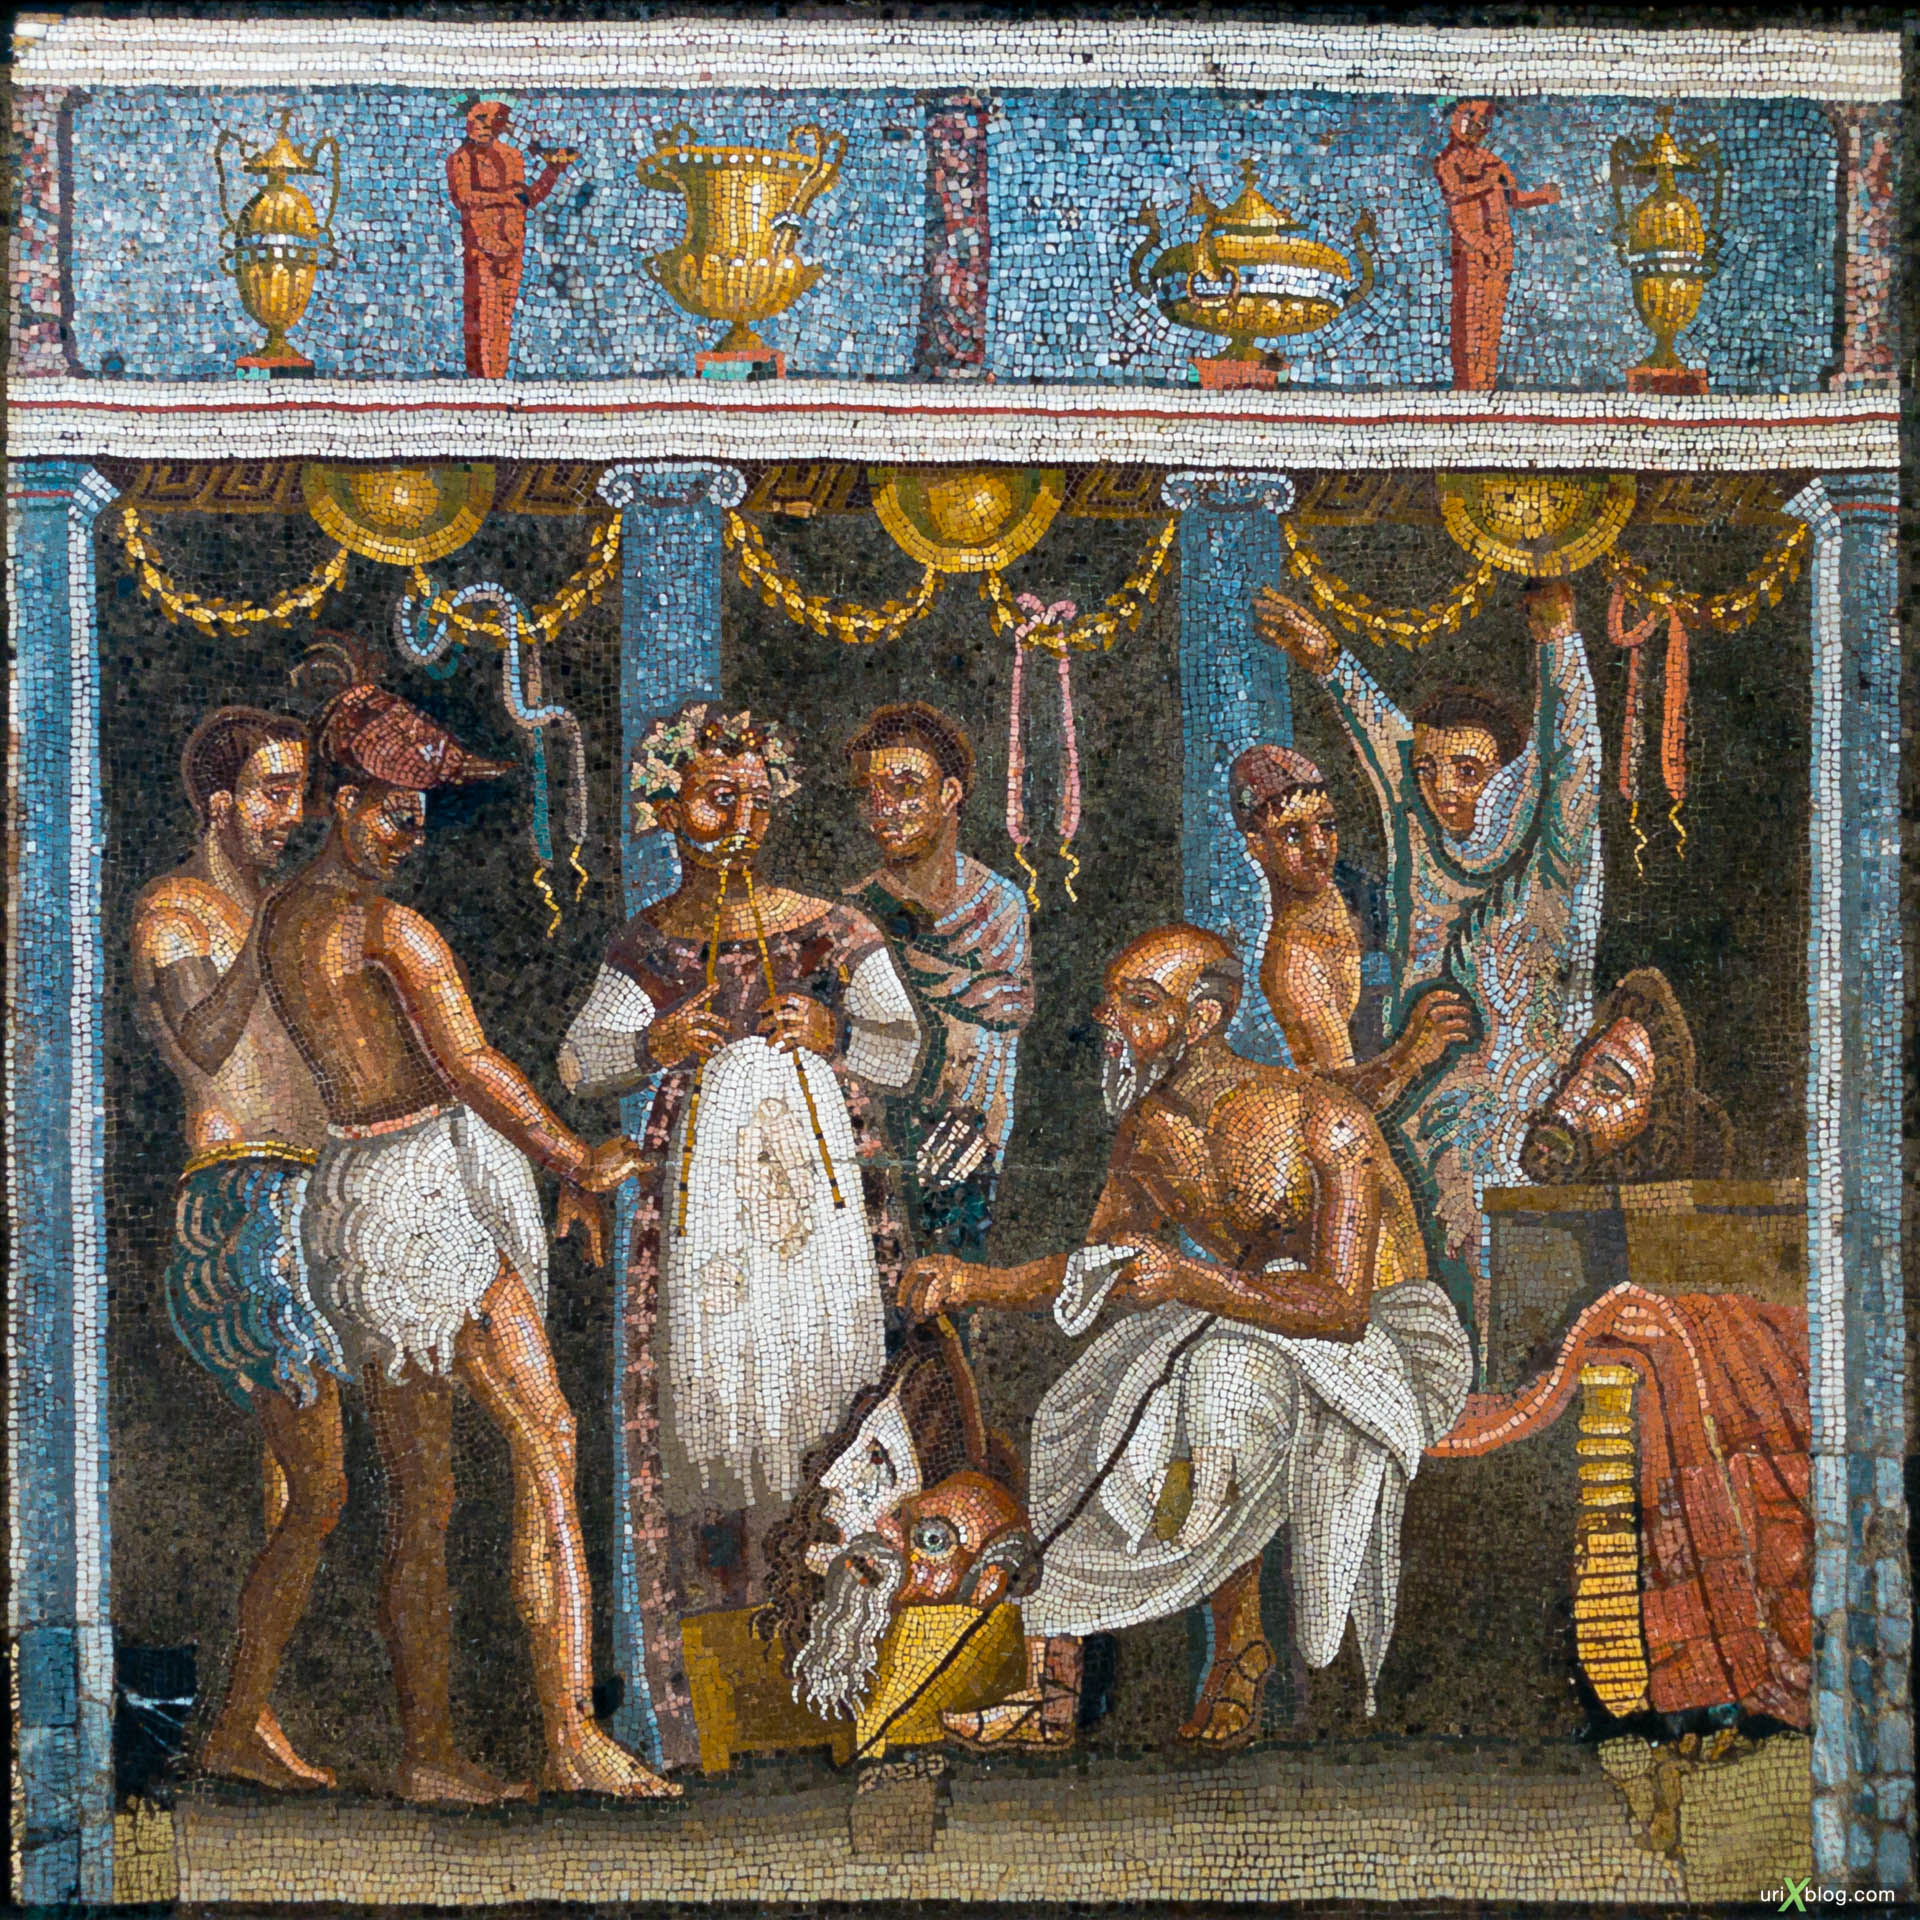 frescoes, mosaic, National Archaeological Museum of Naples, ancient Rome, Pompei, exhibition, Naples, Italy